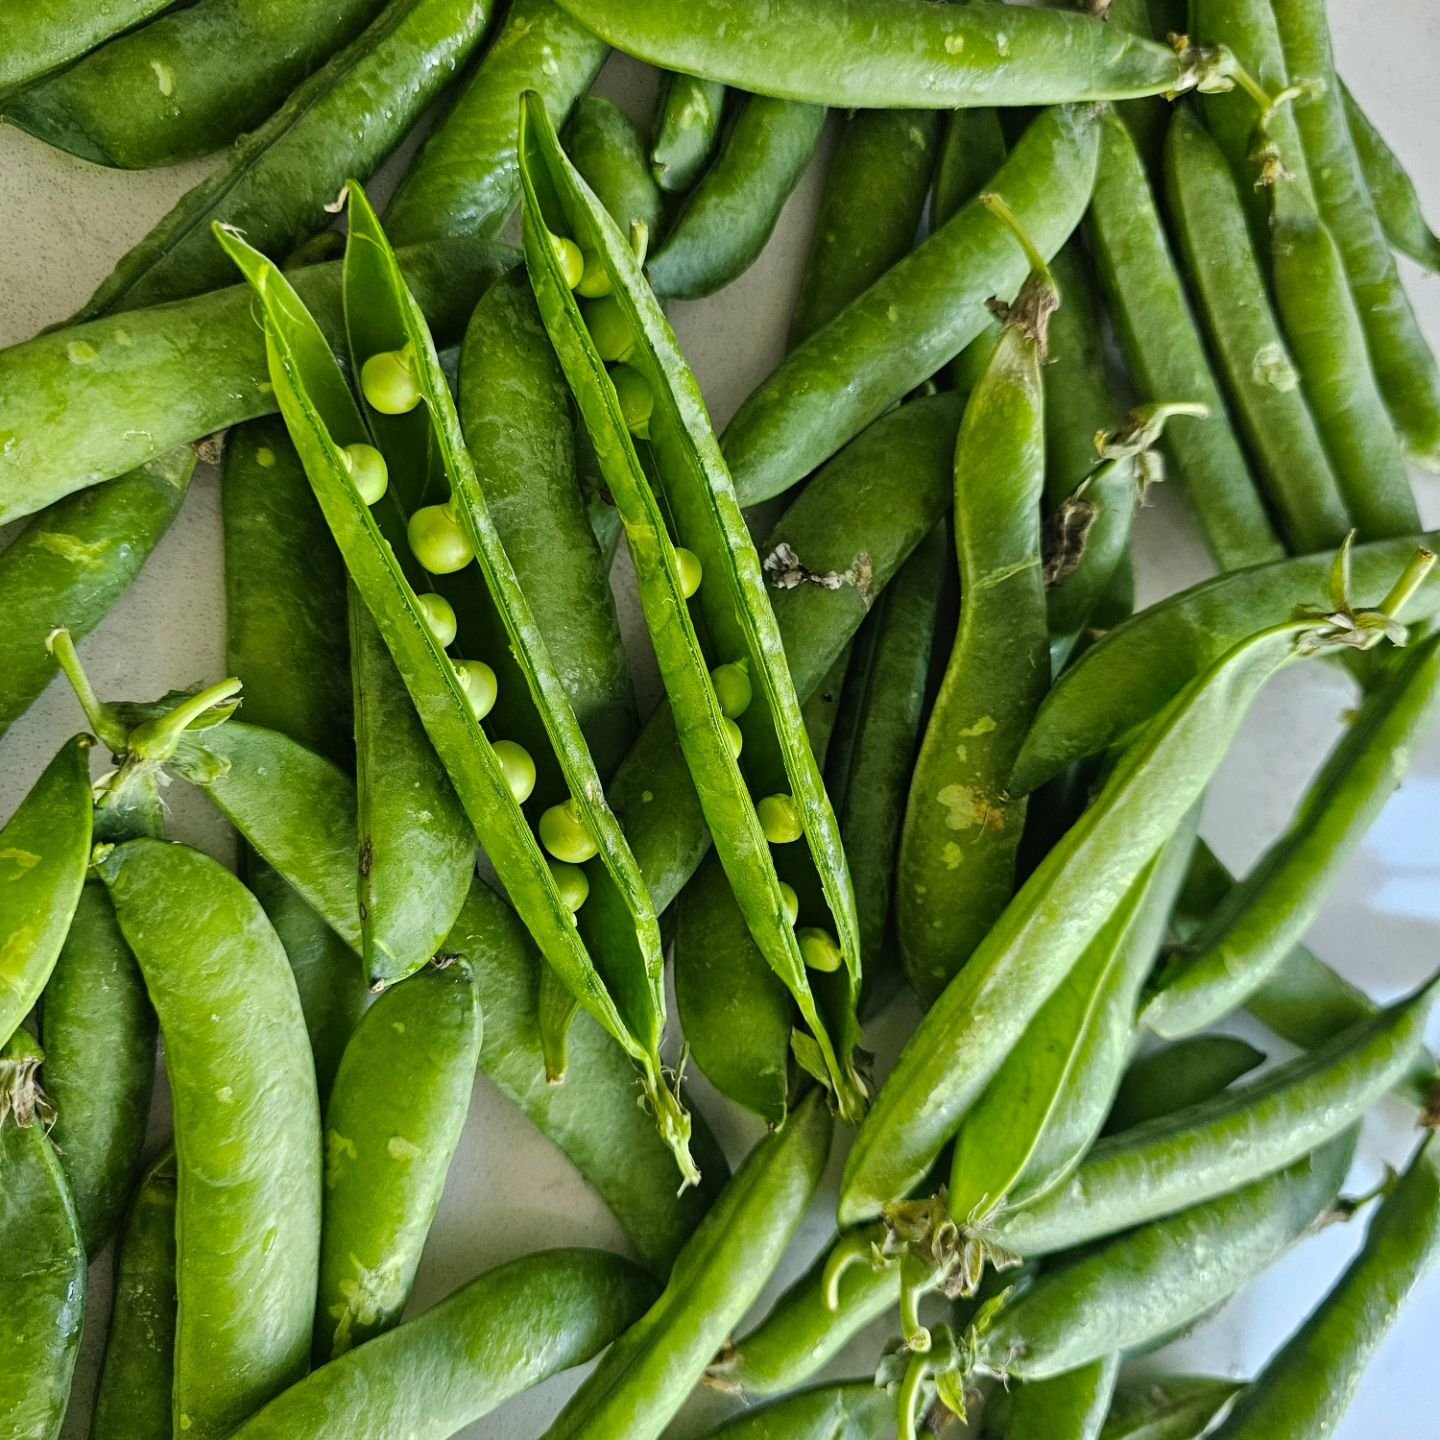 Celebrate the bounty of spring with Tutti Frutti English Peas, Sugar Snap Peas and Snow Peas. Grown in beautiful Santa Barbara wine country near California's Central Coast.

Fun Fact: 1 lb of English peas is approximately 1 cup of shelled peas. 

Wha